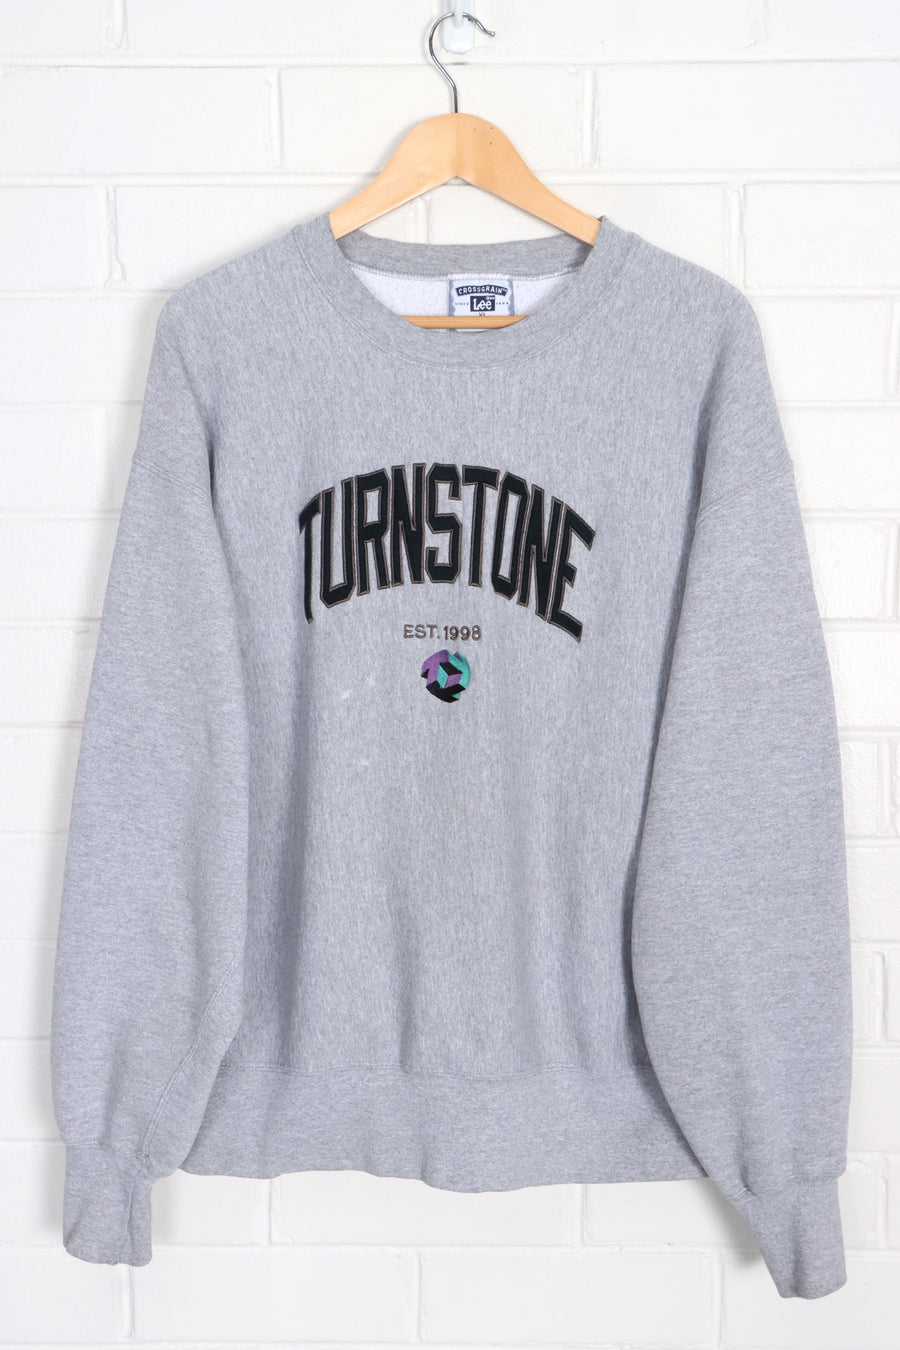 Turnstone Embroidered Spell Out Geometric Logo LEE Sweatshirt (XL)